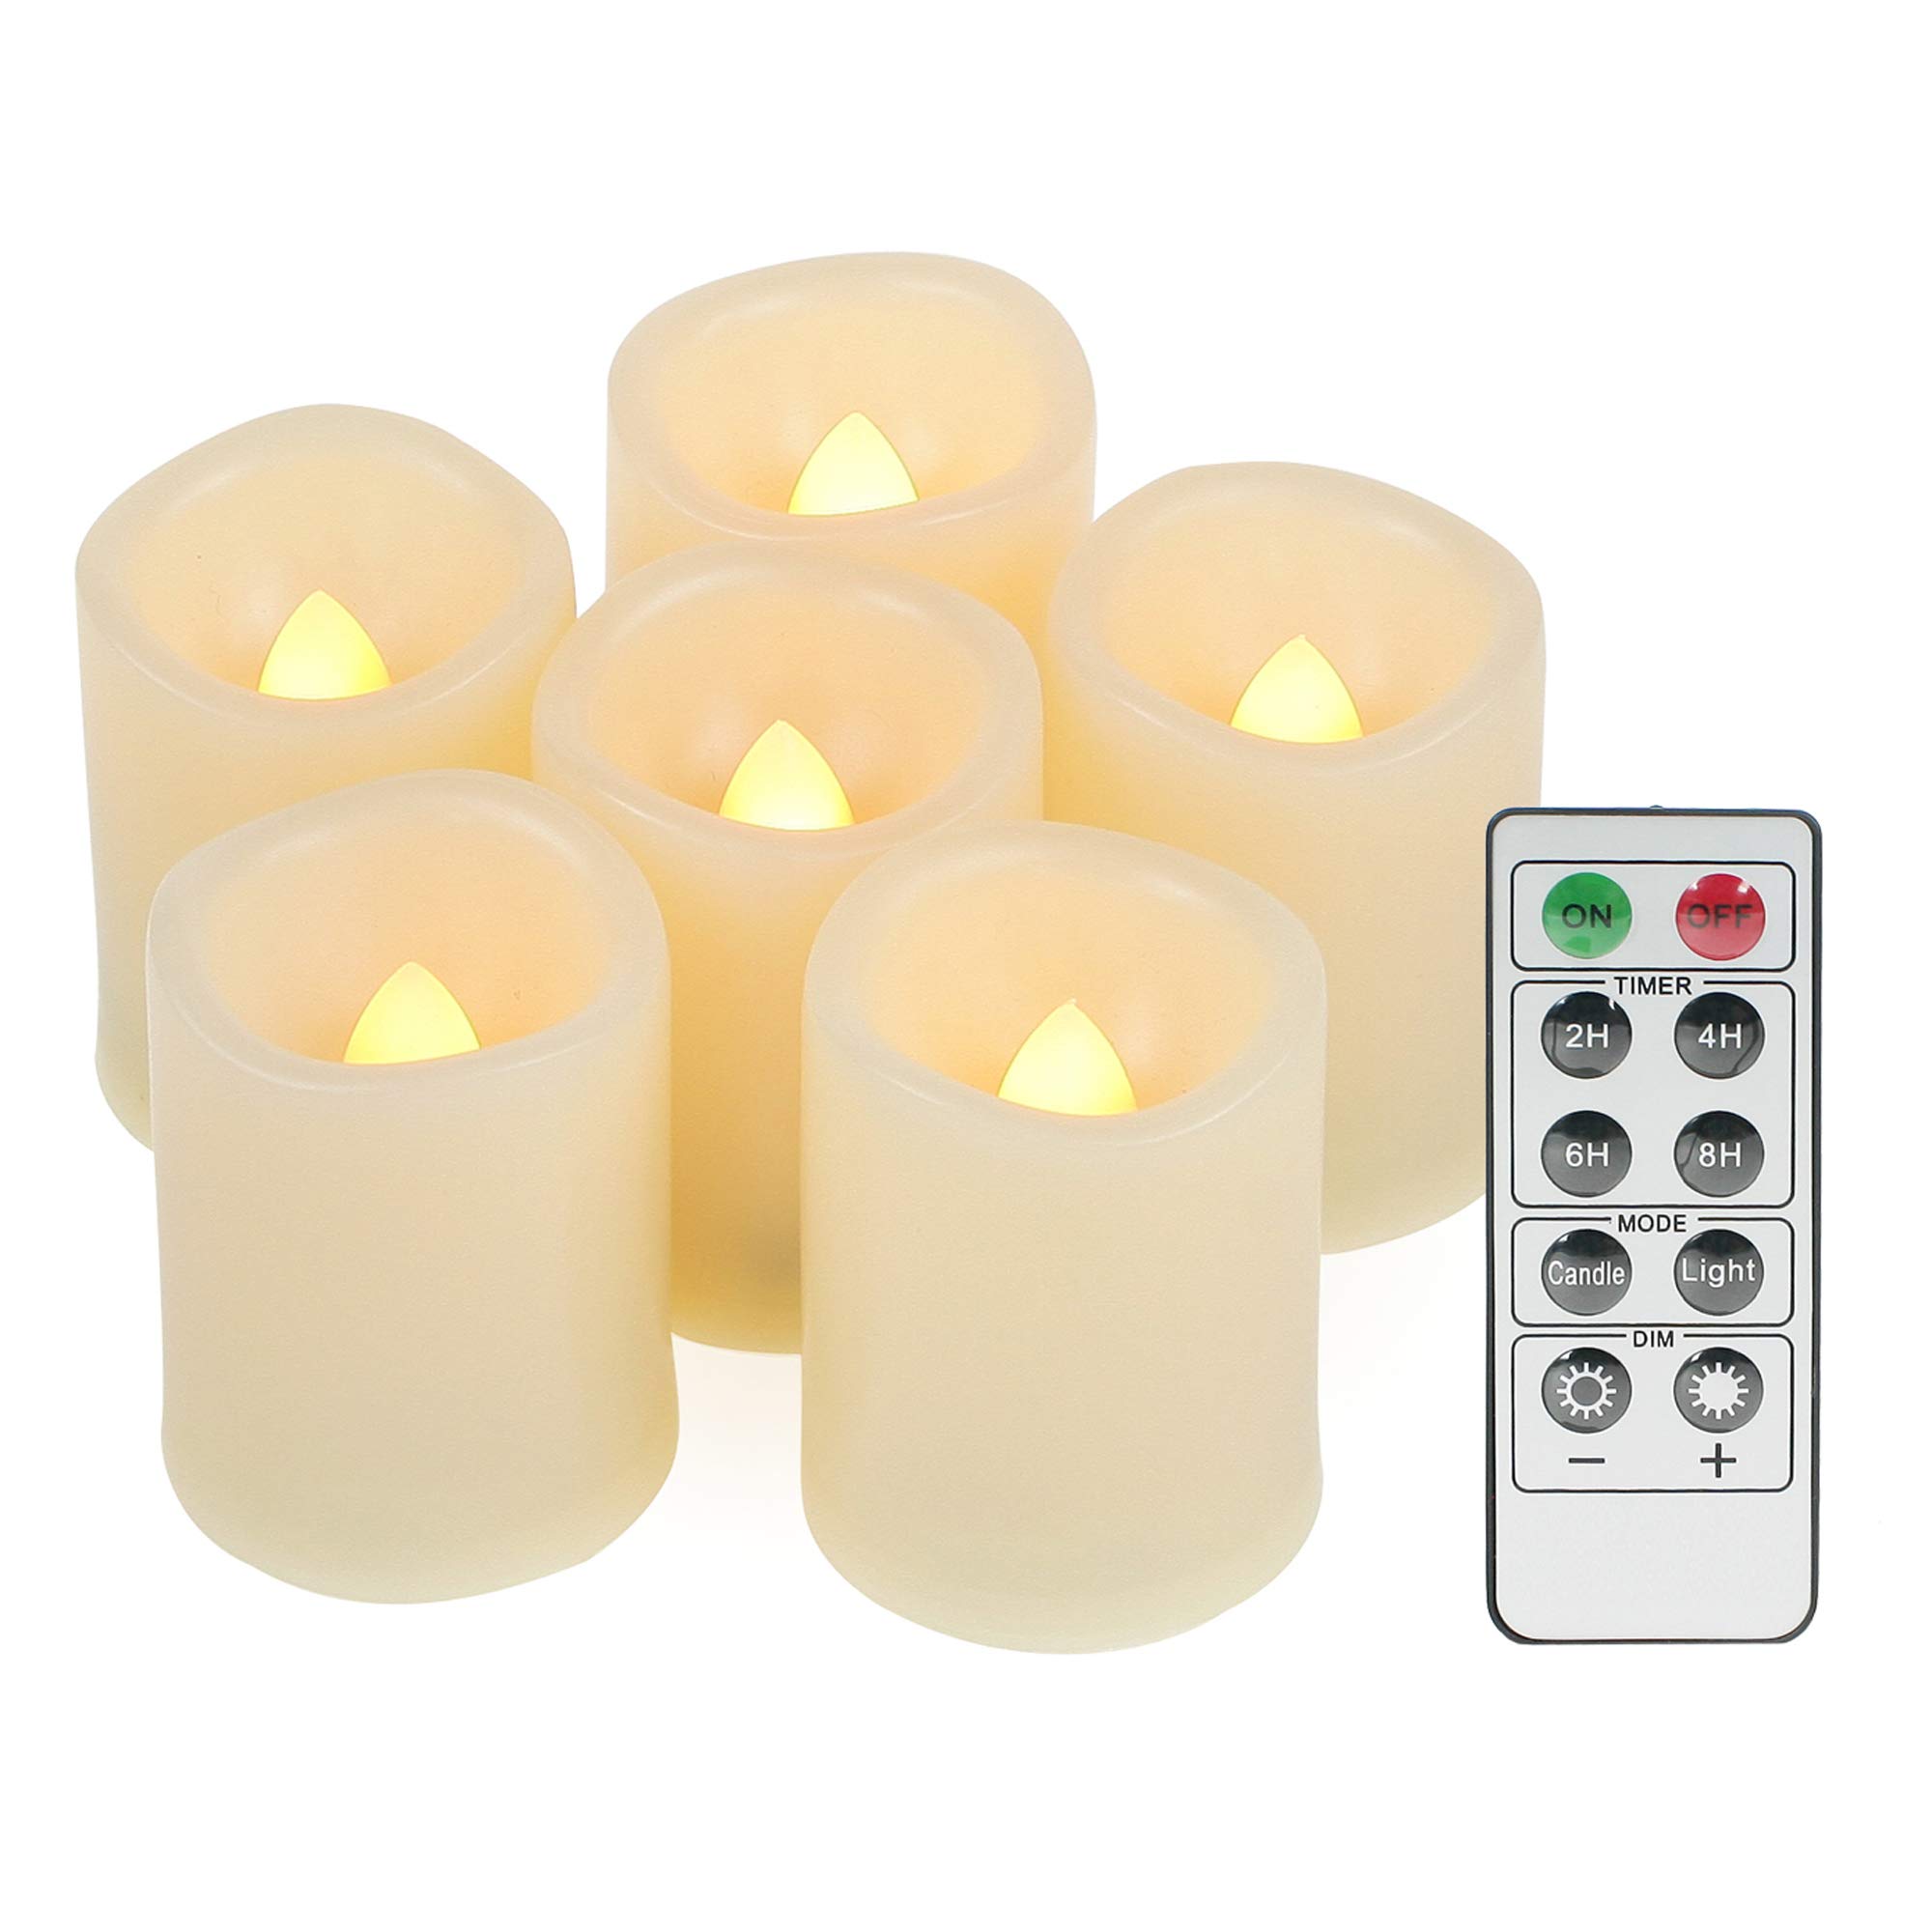 CANDLE IDEA 6 PcS Led Flickering Flameless Votive Tea Lights candles with Remote control Battery OperatedElectric Outdoor Tealights Timer ca